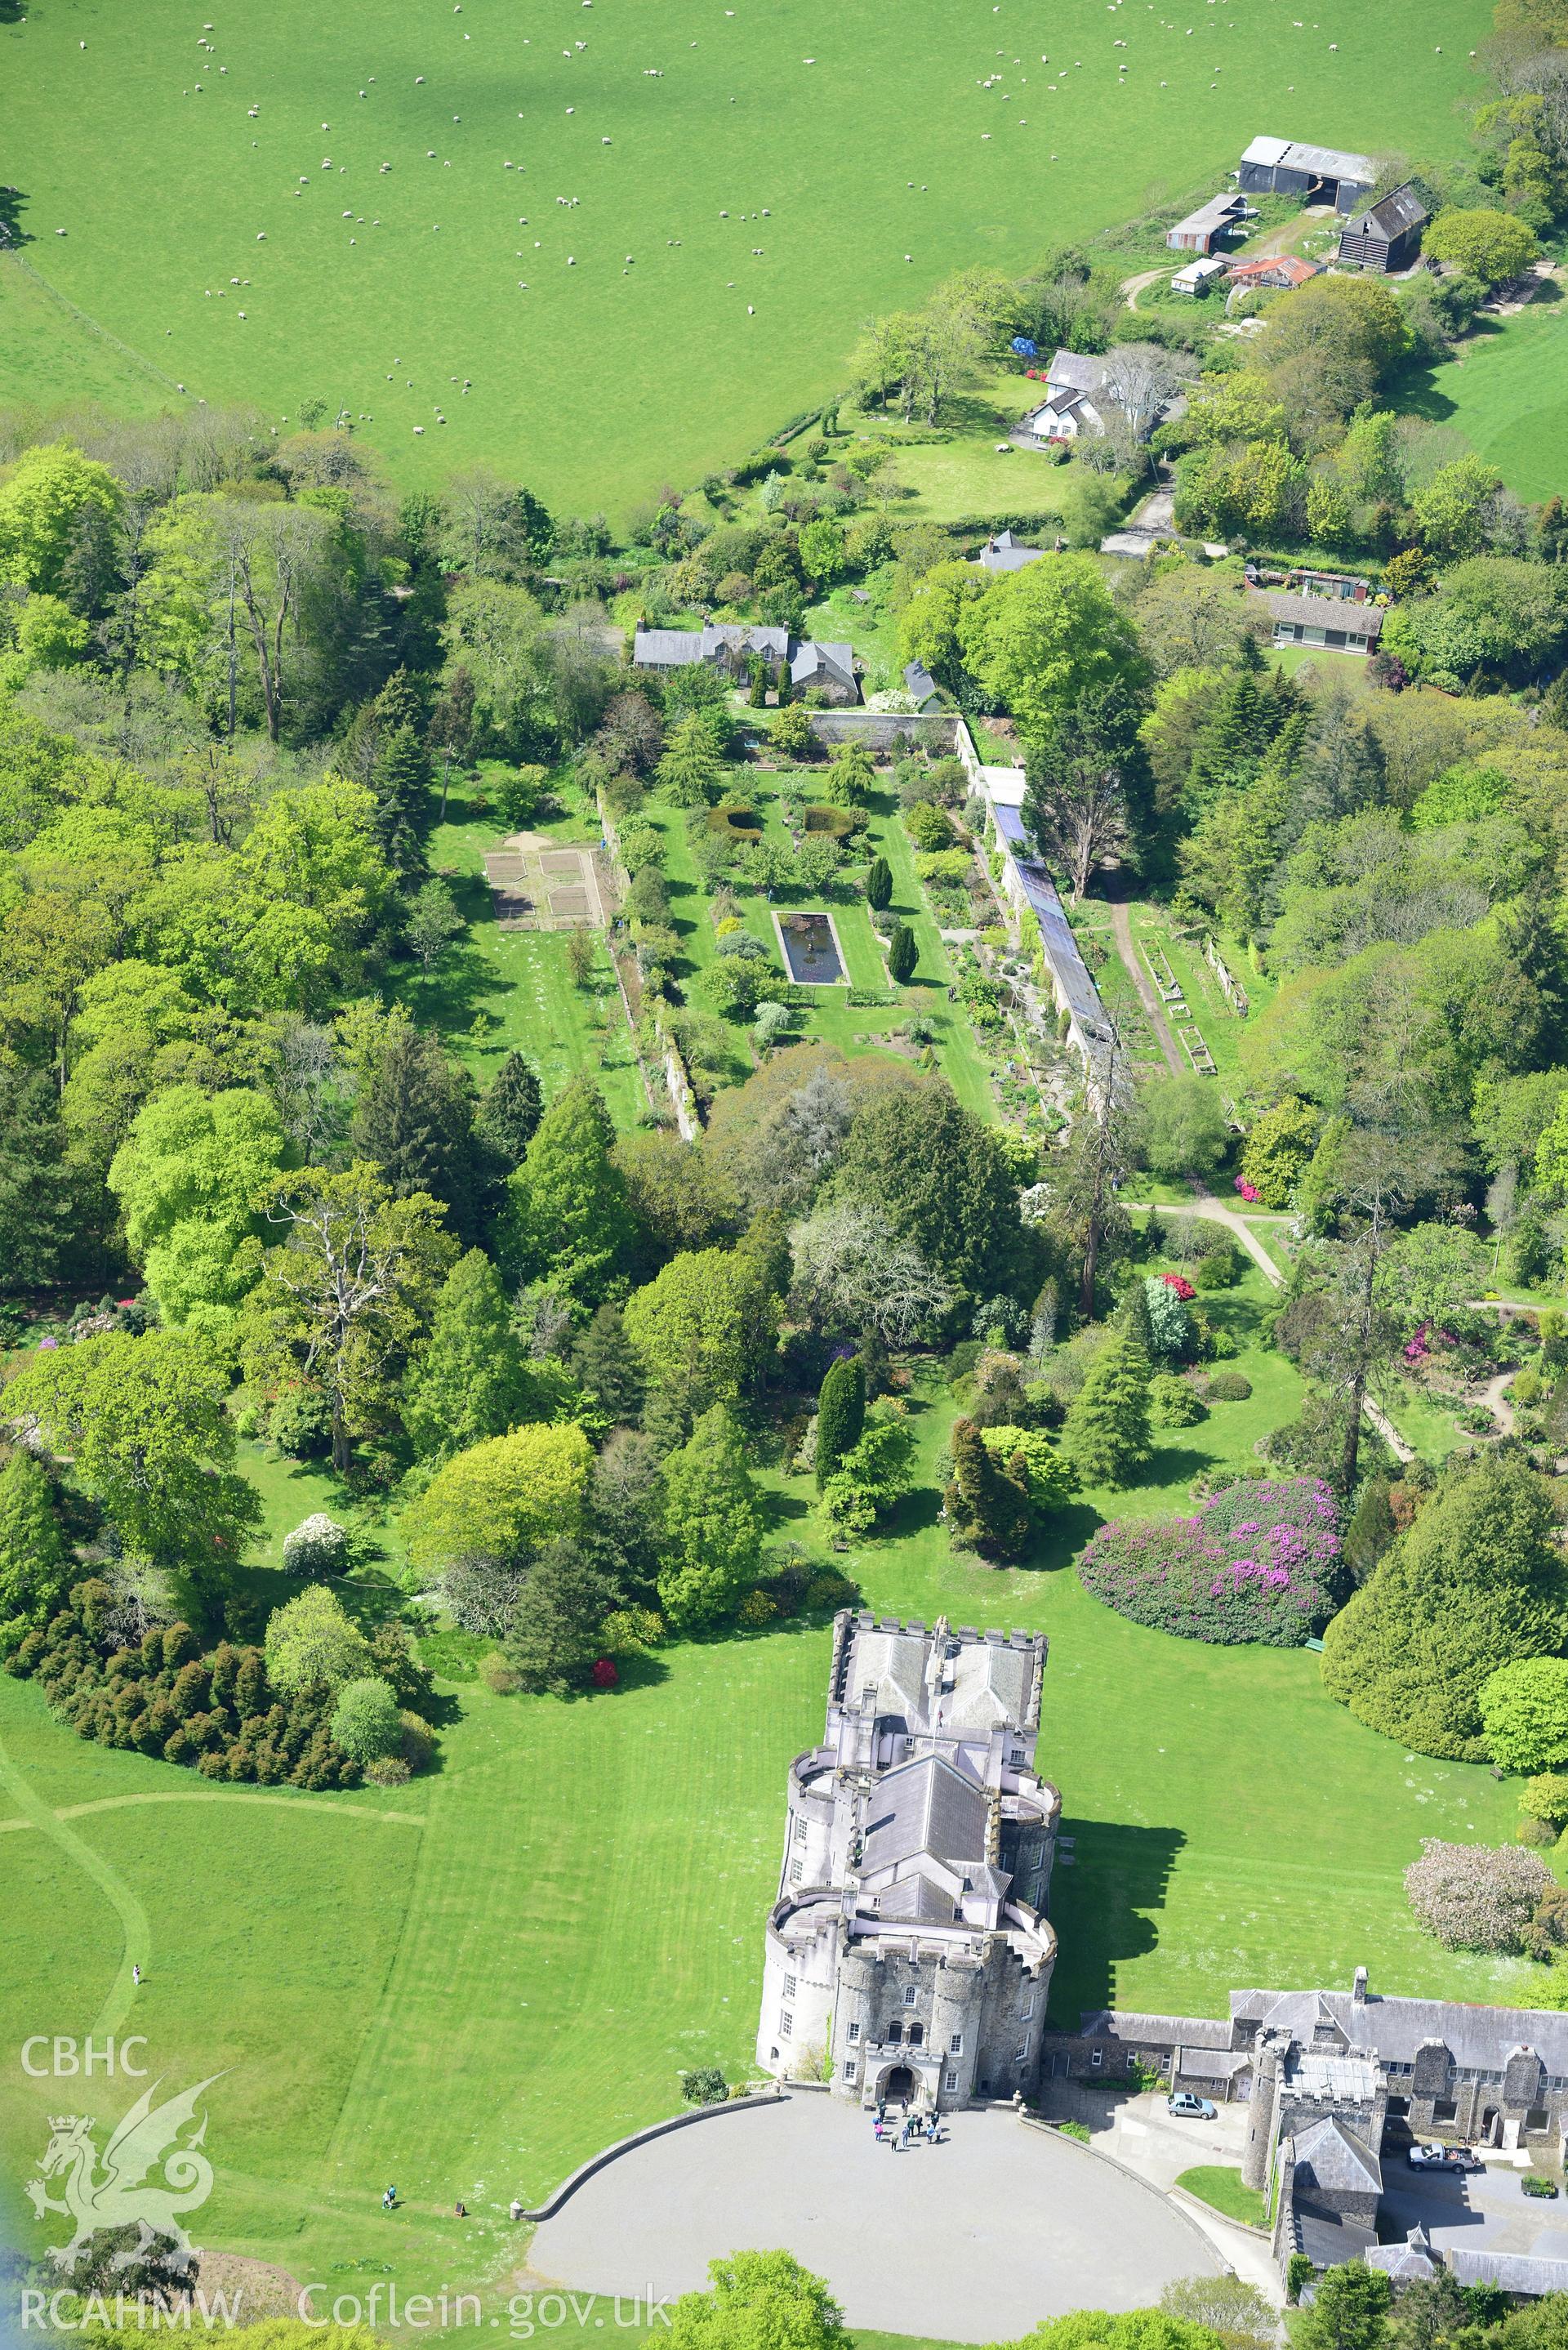 Picton Castle and gardens, Slebech. Oblique aerial photograph taken during the Royal Commission's programme of archaeological aerial reconnaissance by Toby Driver on 13th May 2015.